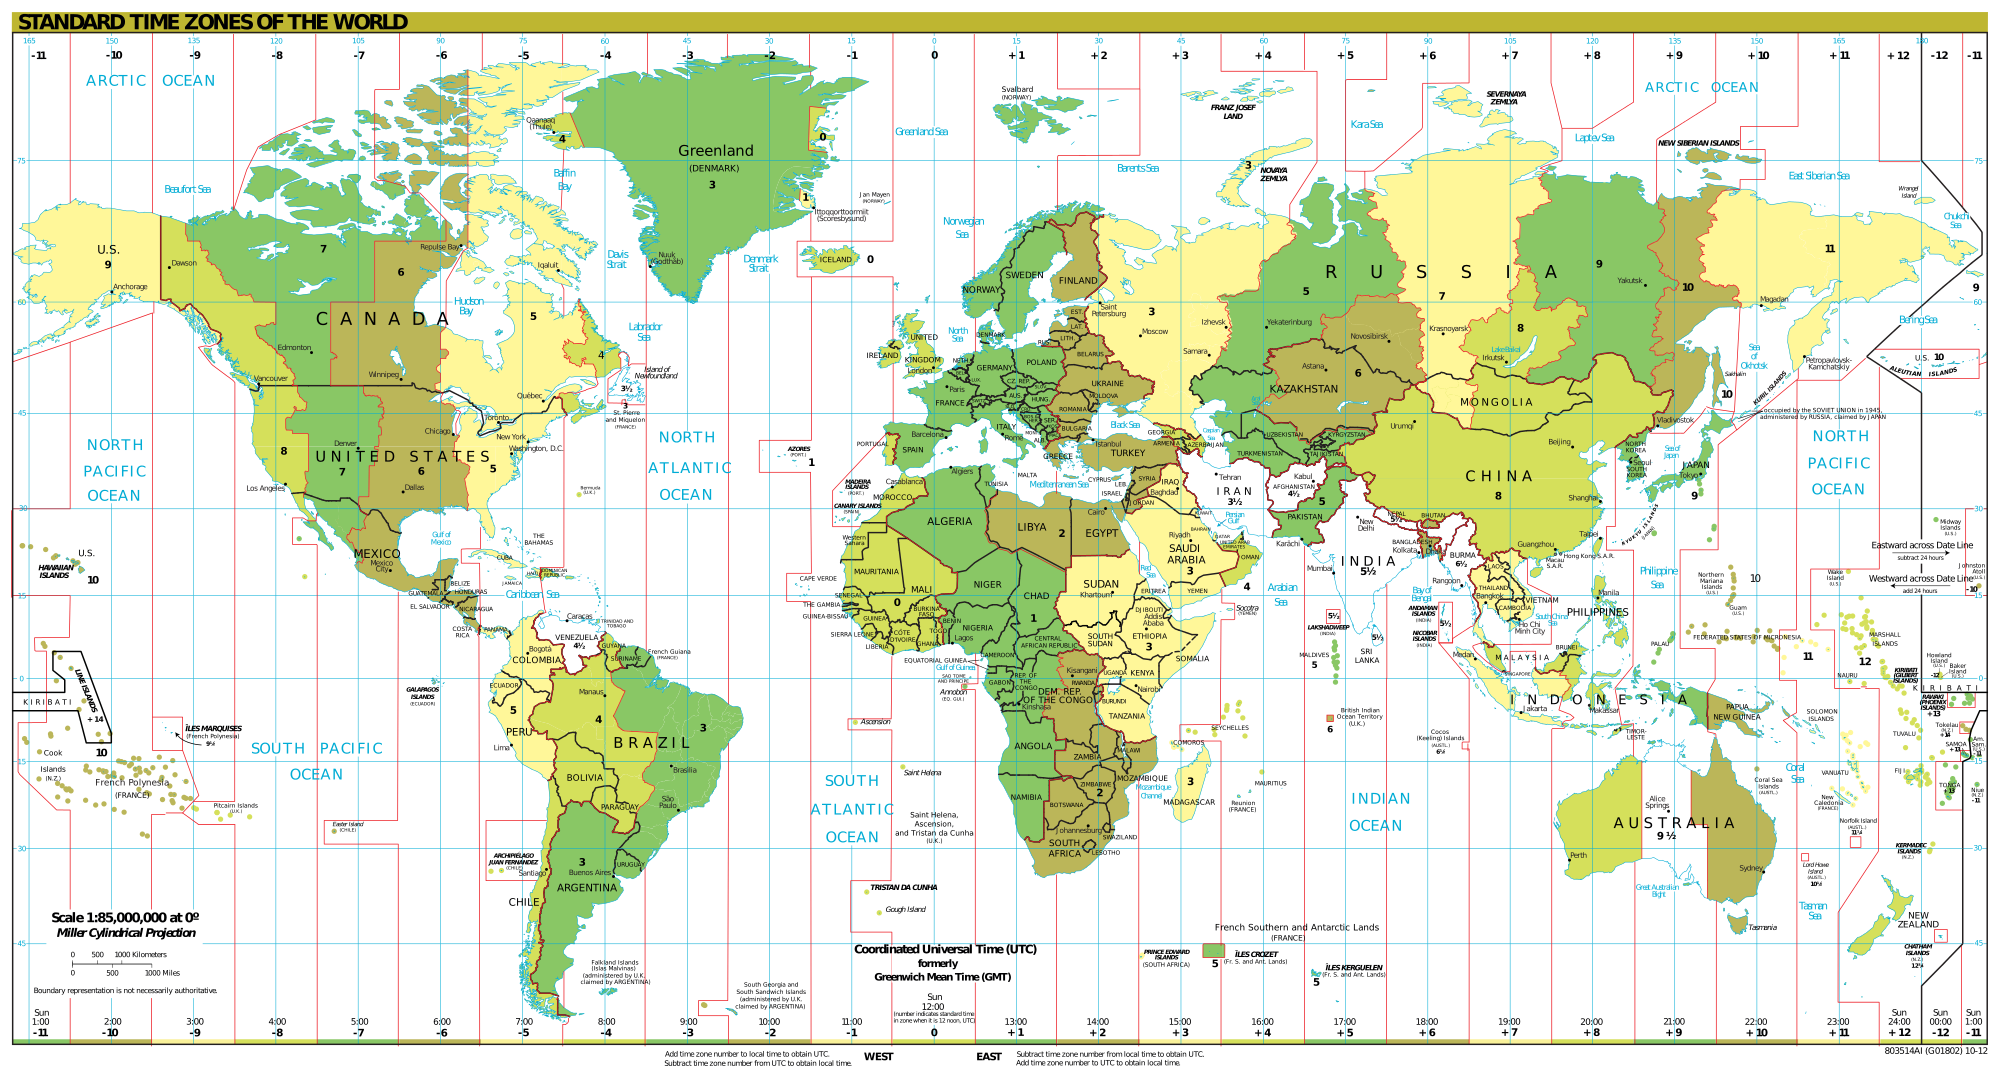 File:World - time zones map (2014).svg - Wikimedia Commons